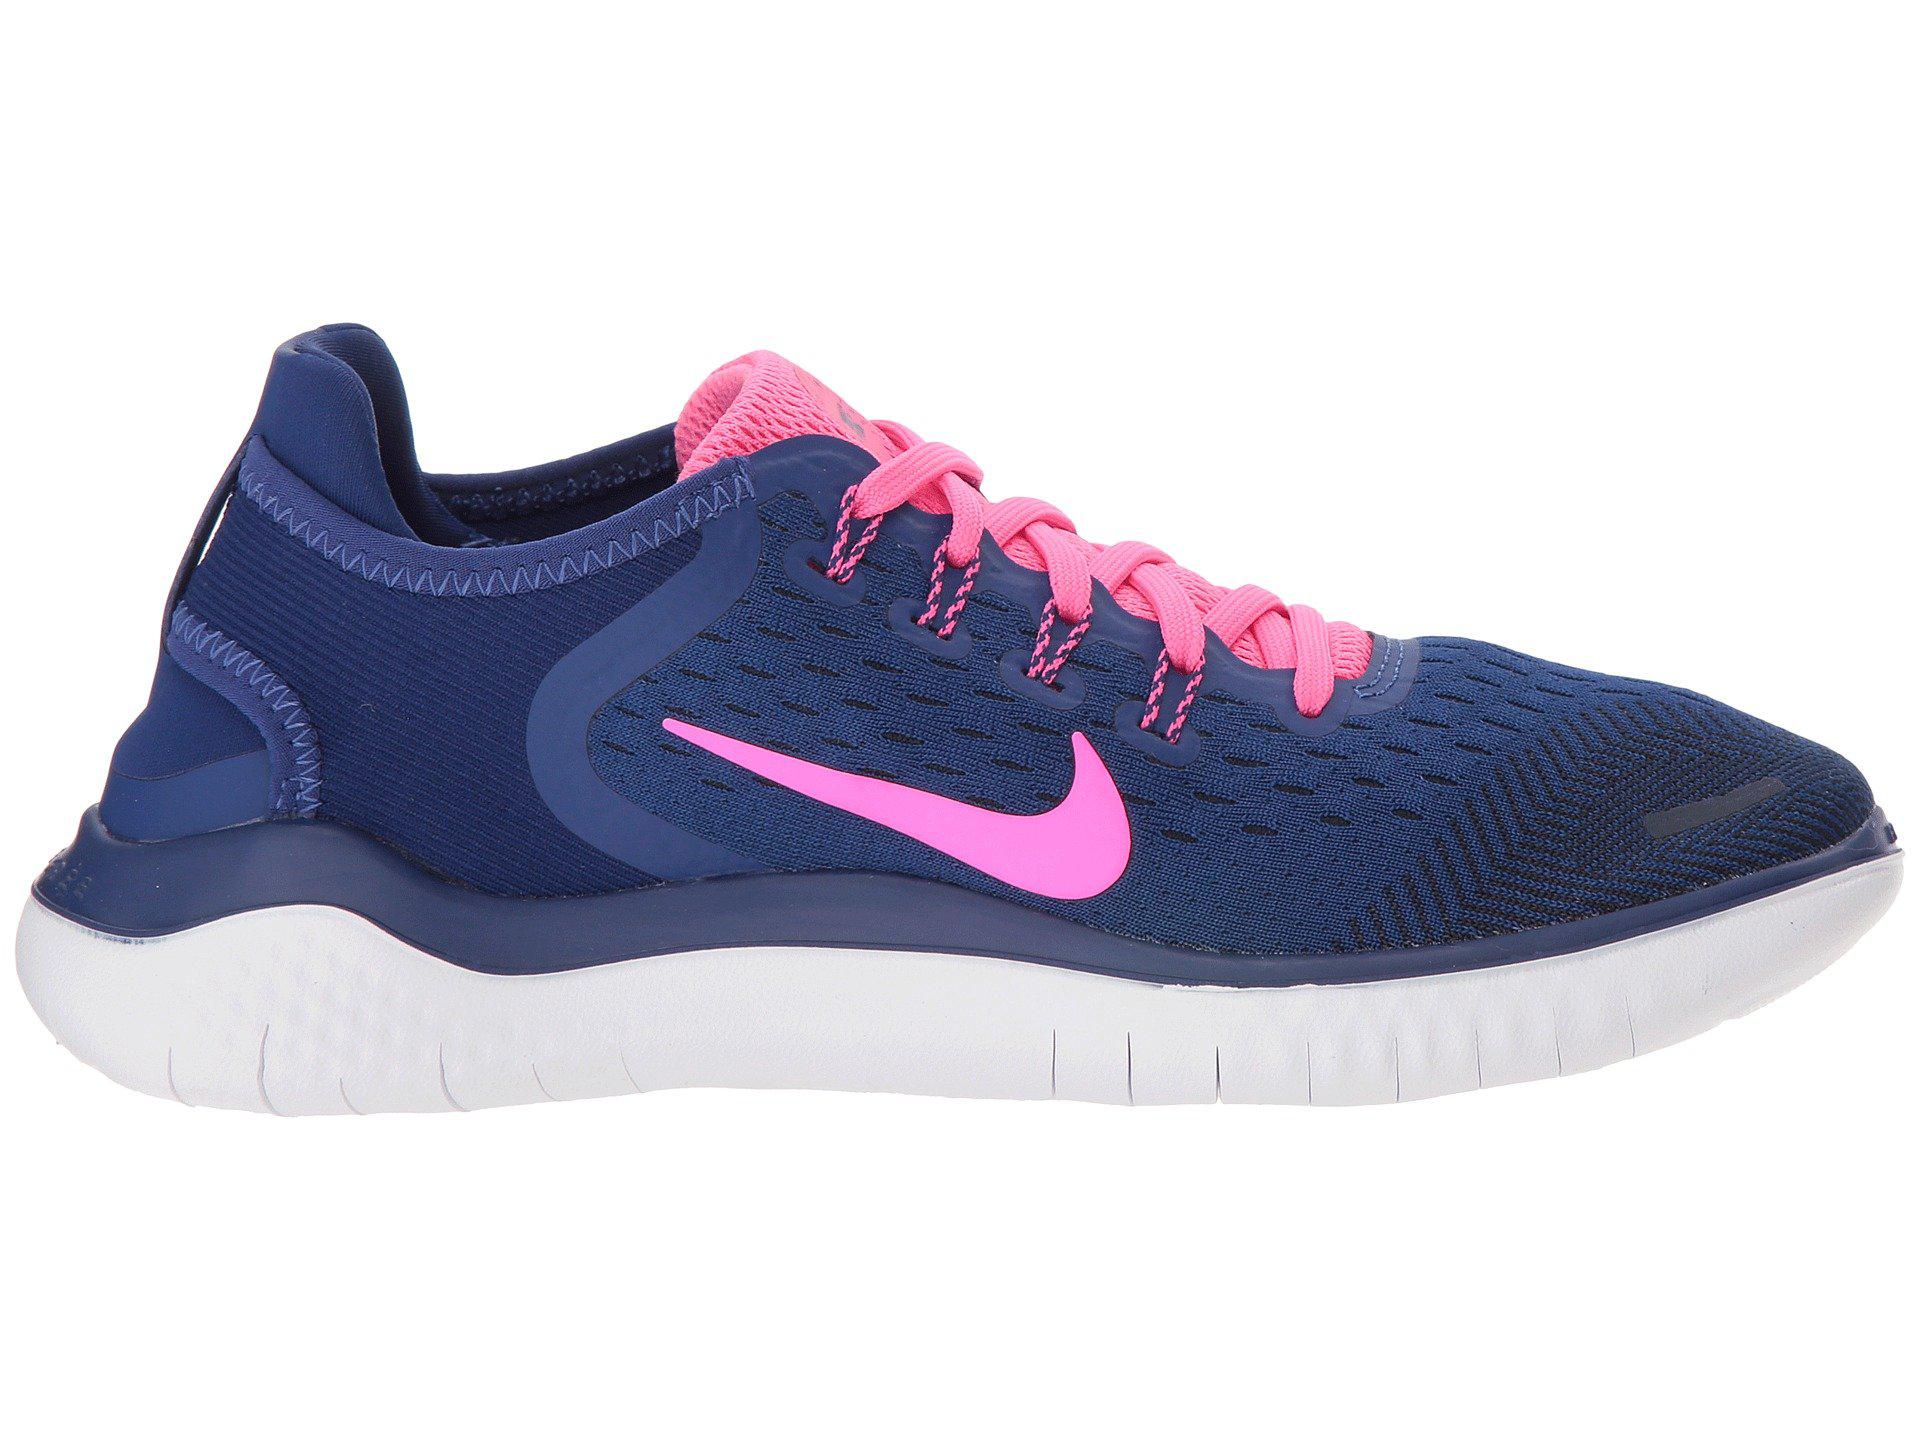 Nike Free Rn 2018 (blue Void/ghost Aqua/indigo Force) Running Shoes in  Natural - Lyst